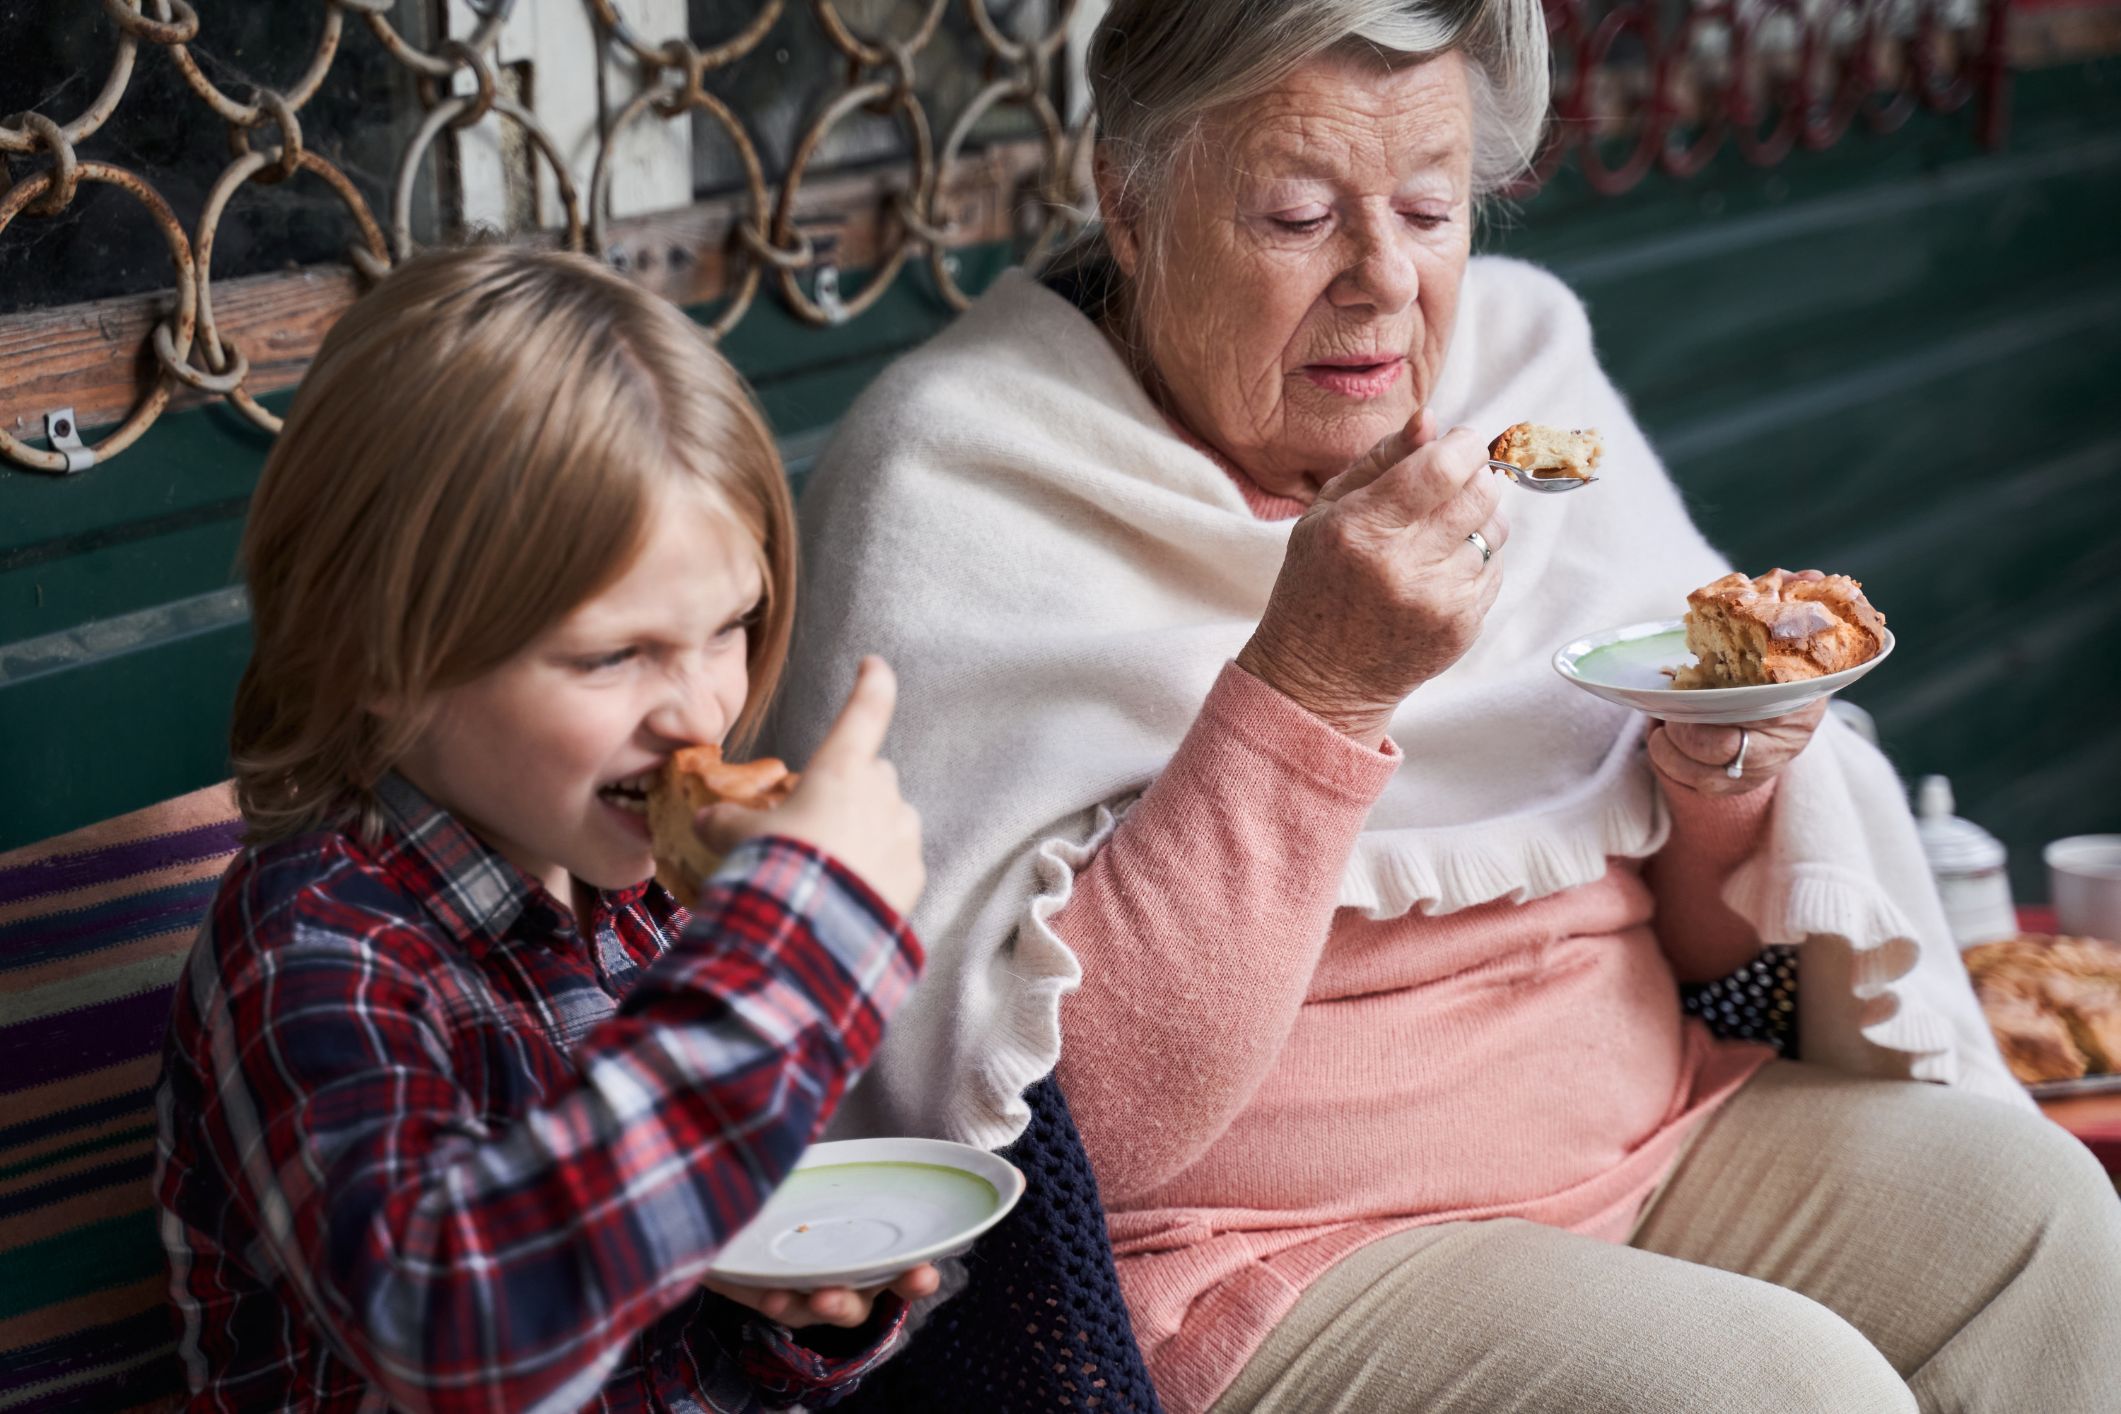 Mum wants advice on how to handle grandma who feeds grandaughter sweets